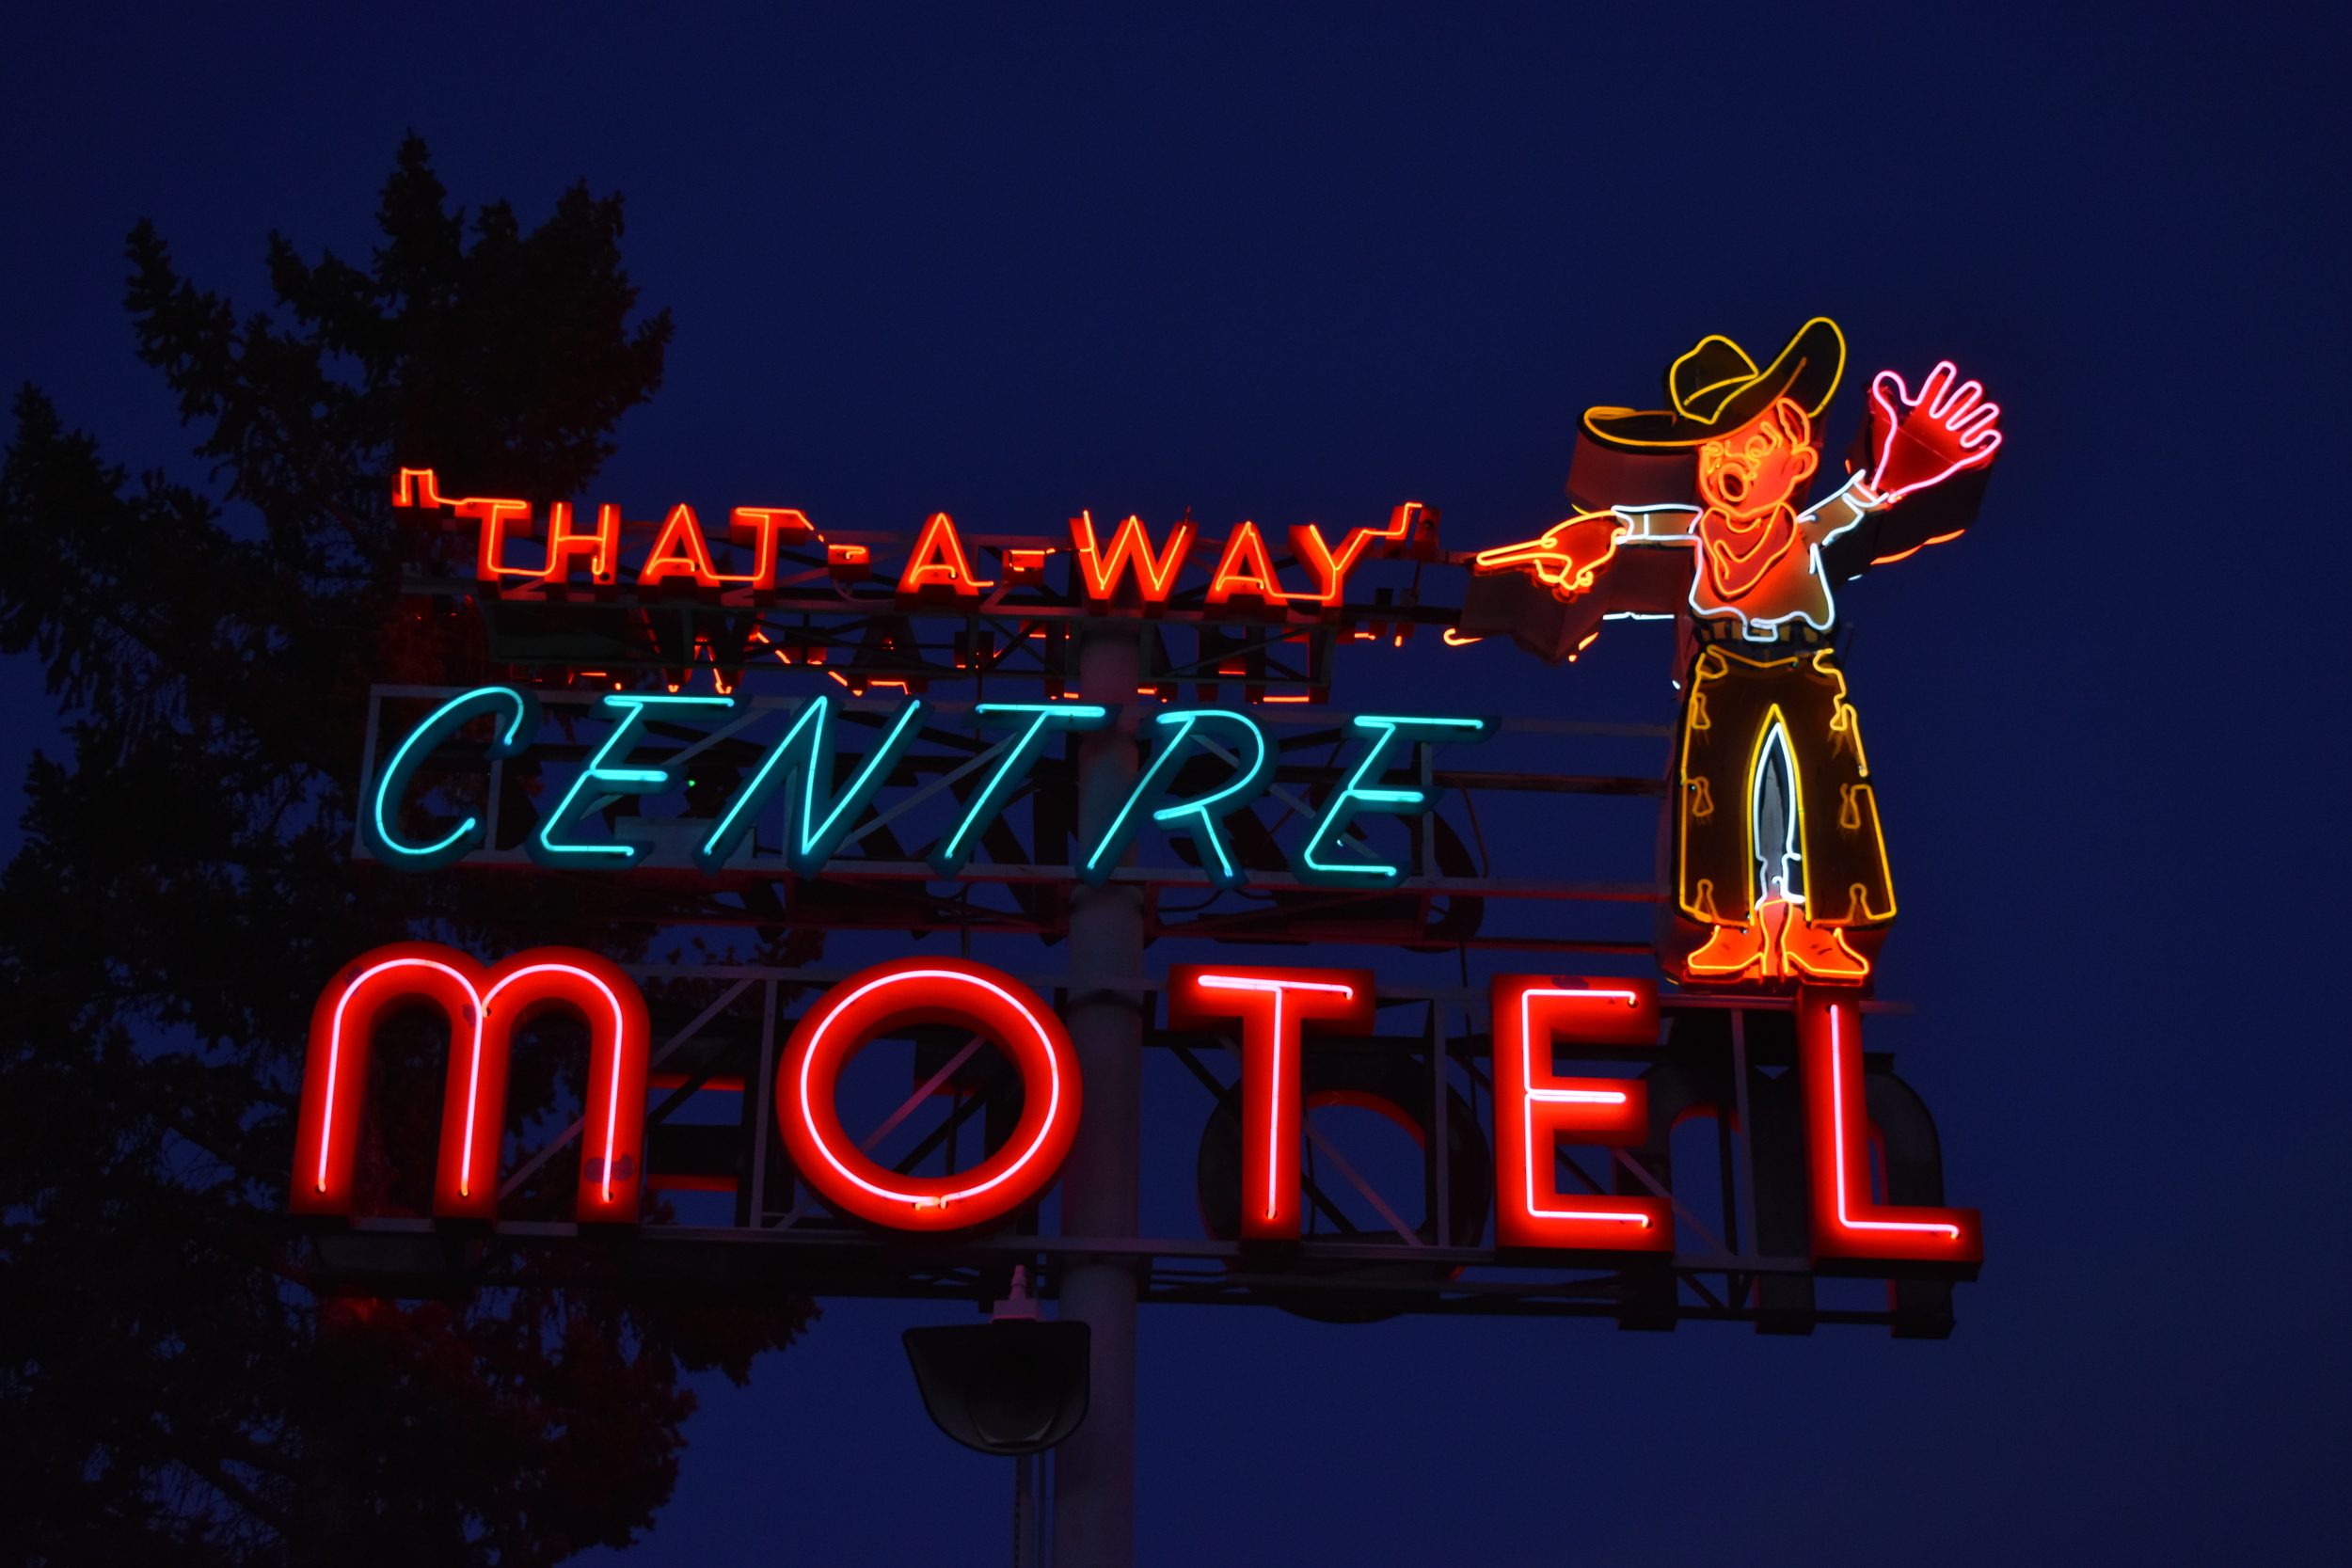 Image of Neon Sign